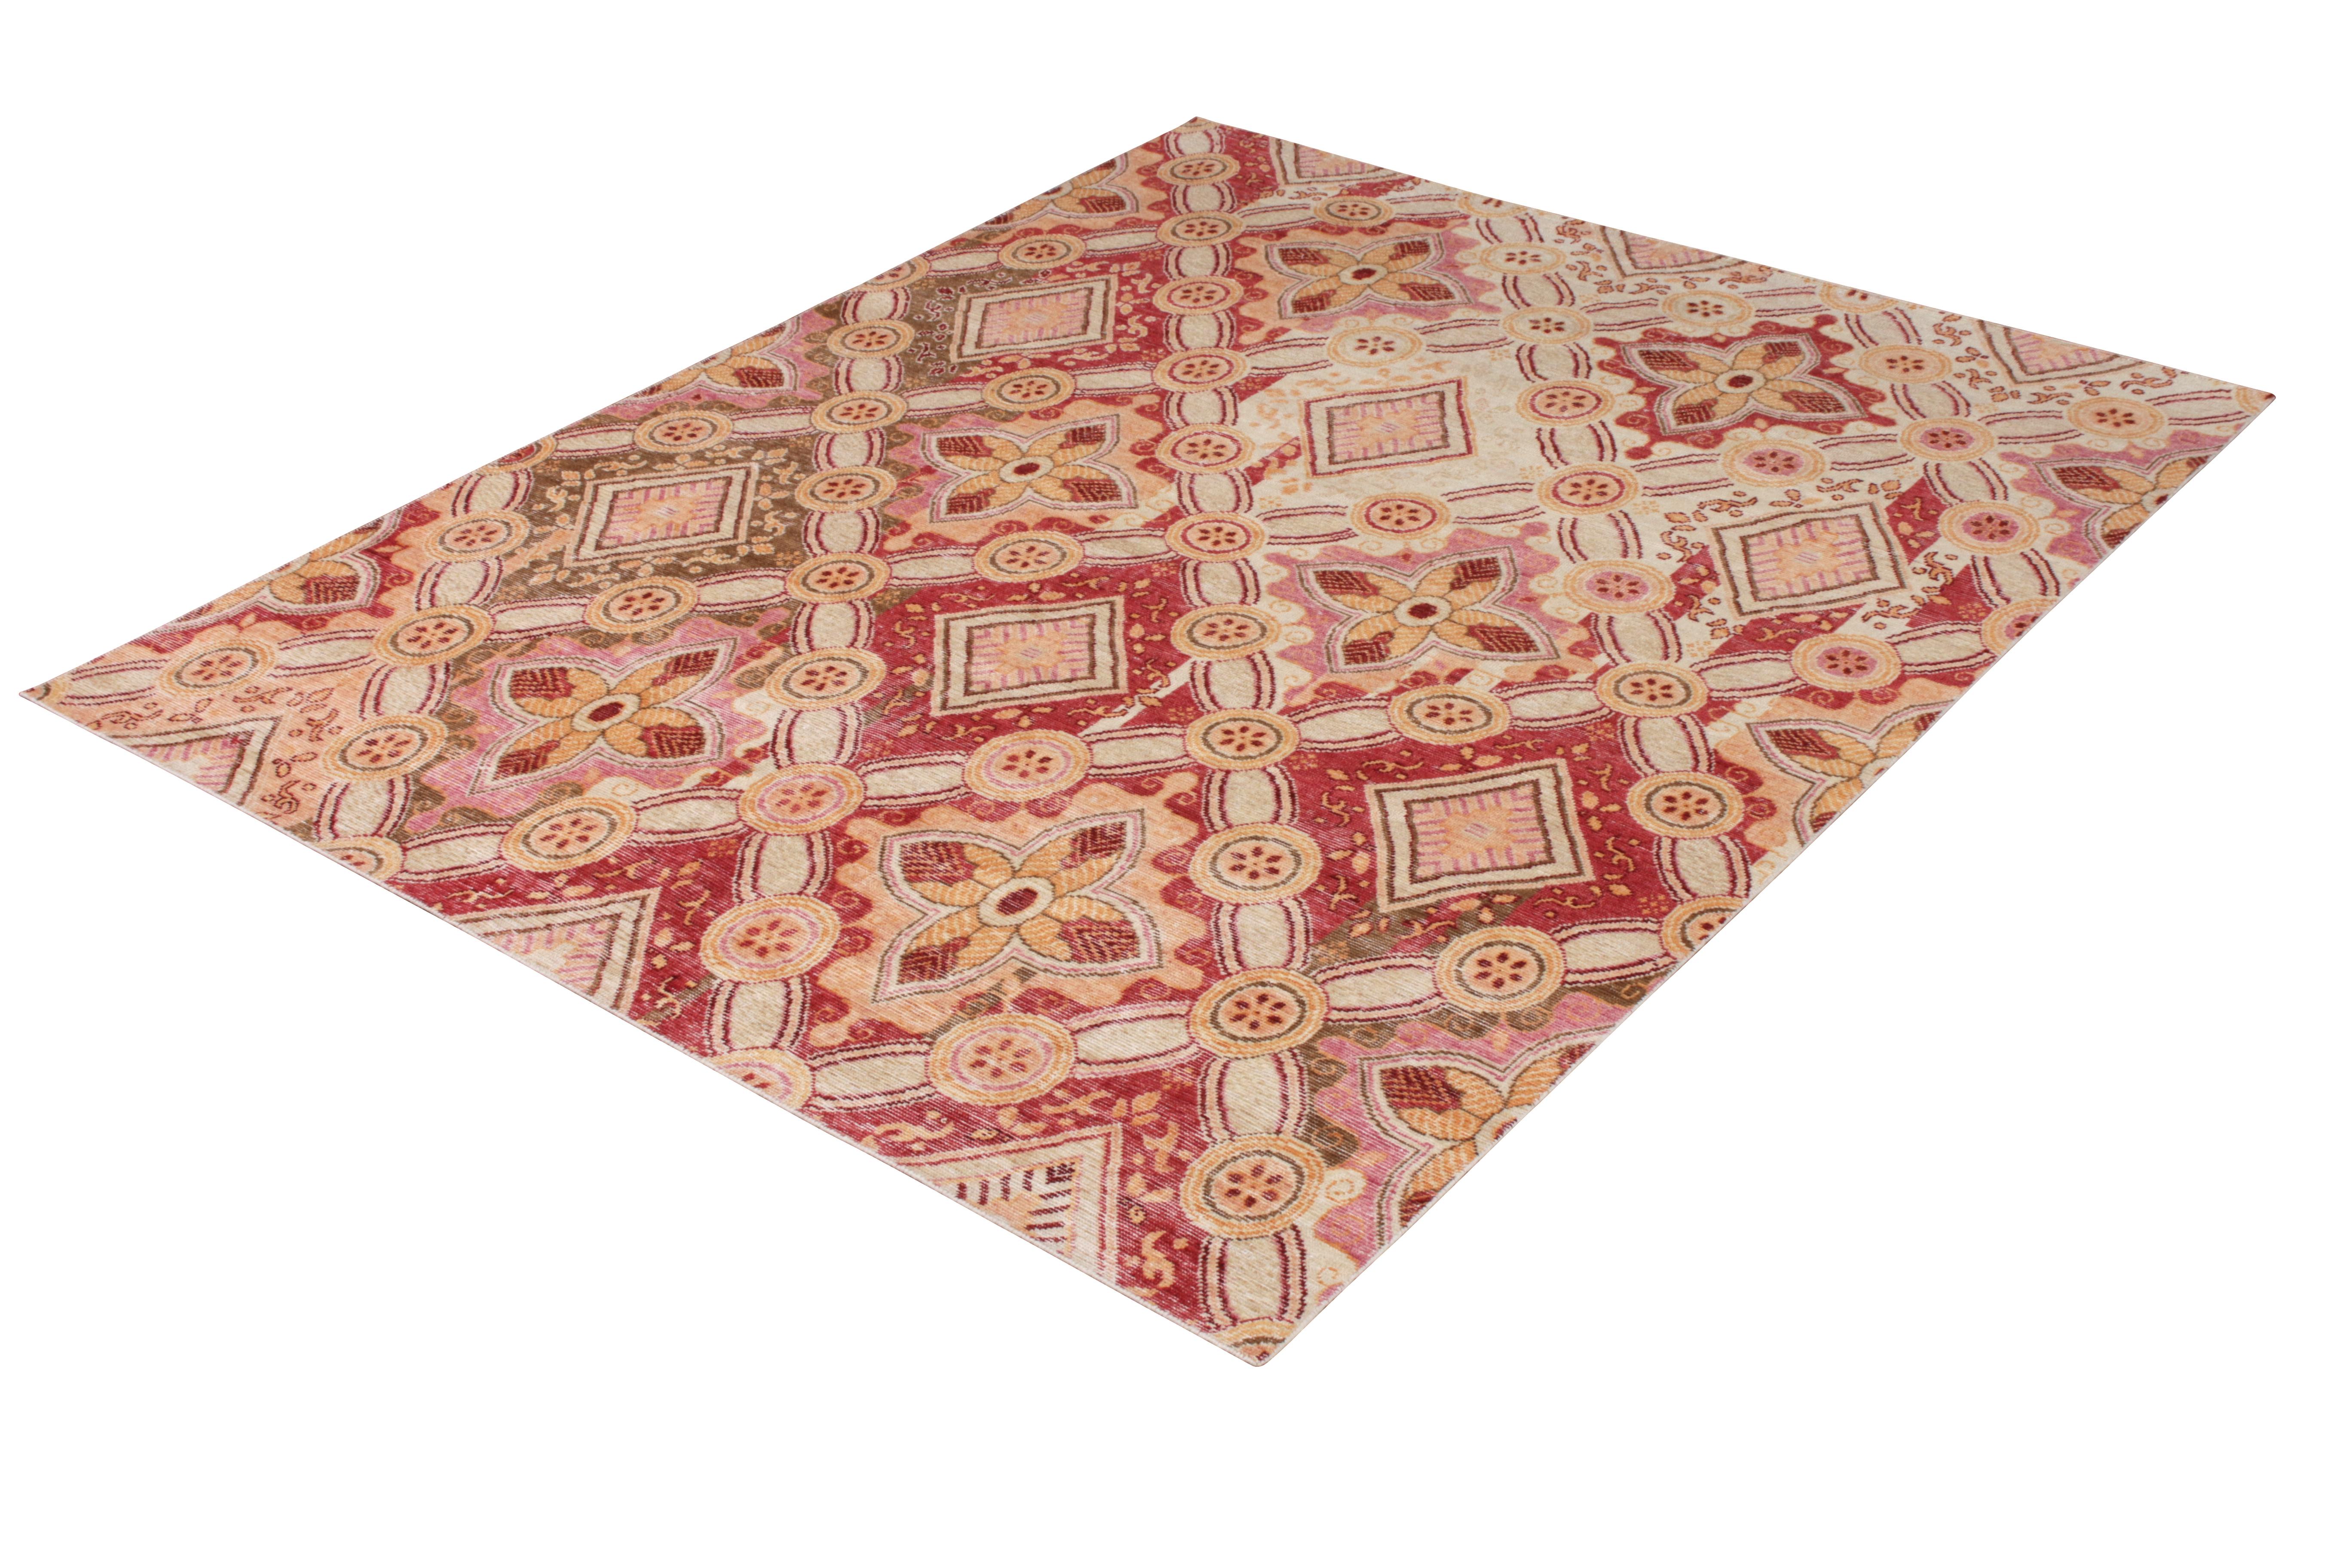 Art Deco Rug & Kilim’s Distressed Style Floral Rug in Red and Pink Classic Floral Pattern For Sale